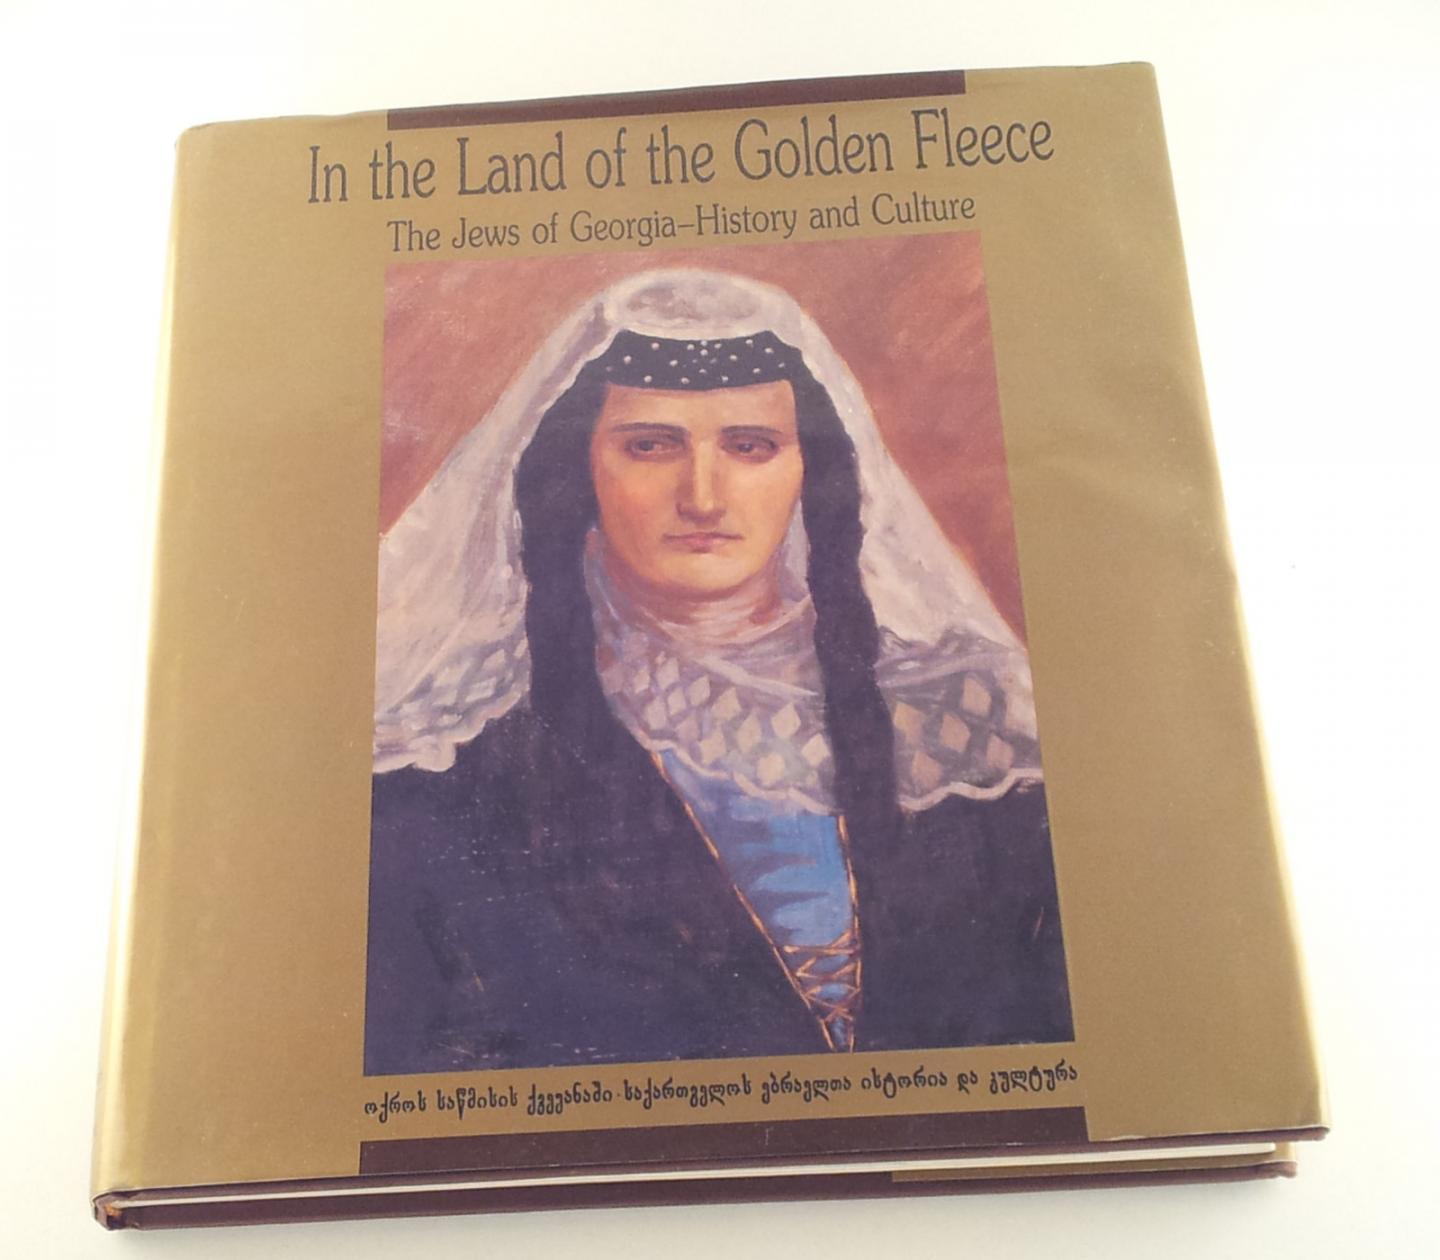 Arbel, Rachel / Magal, Lily (editors) - In the Land of the Golden Fleece / The Jews of Georgia - History and Culture